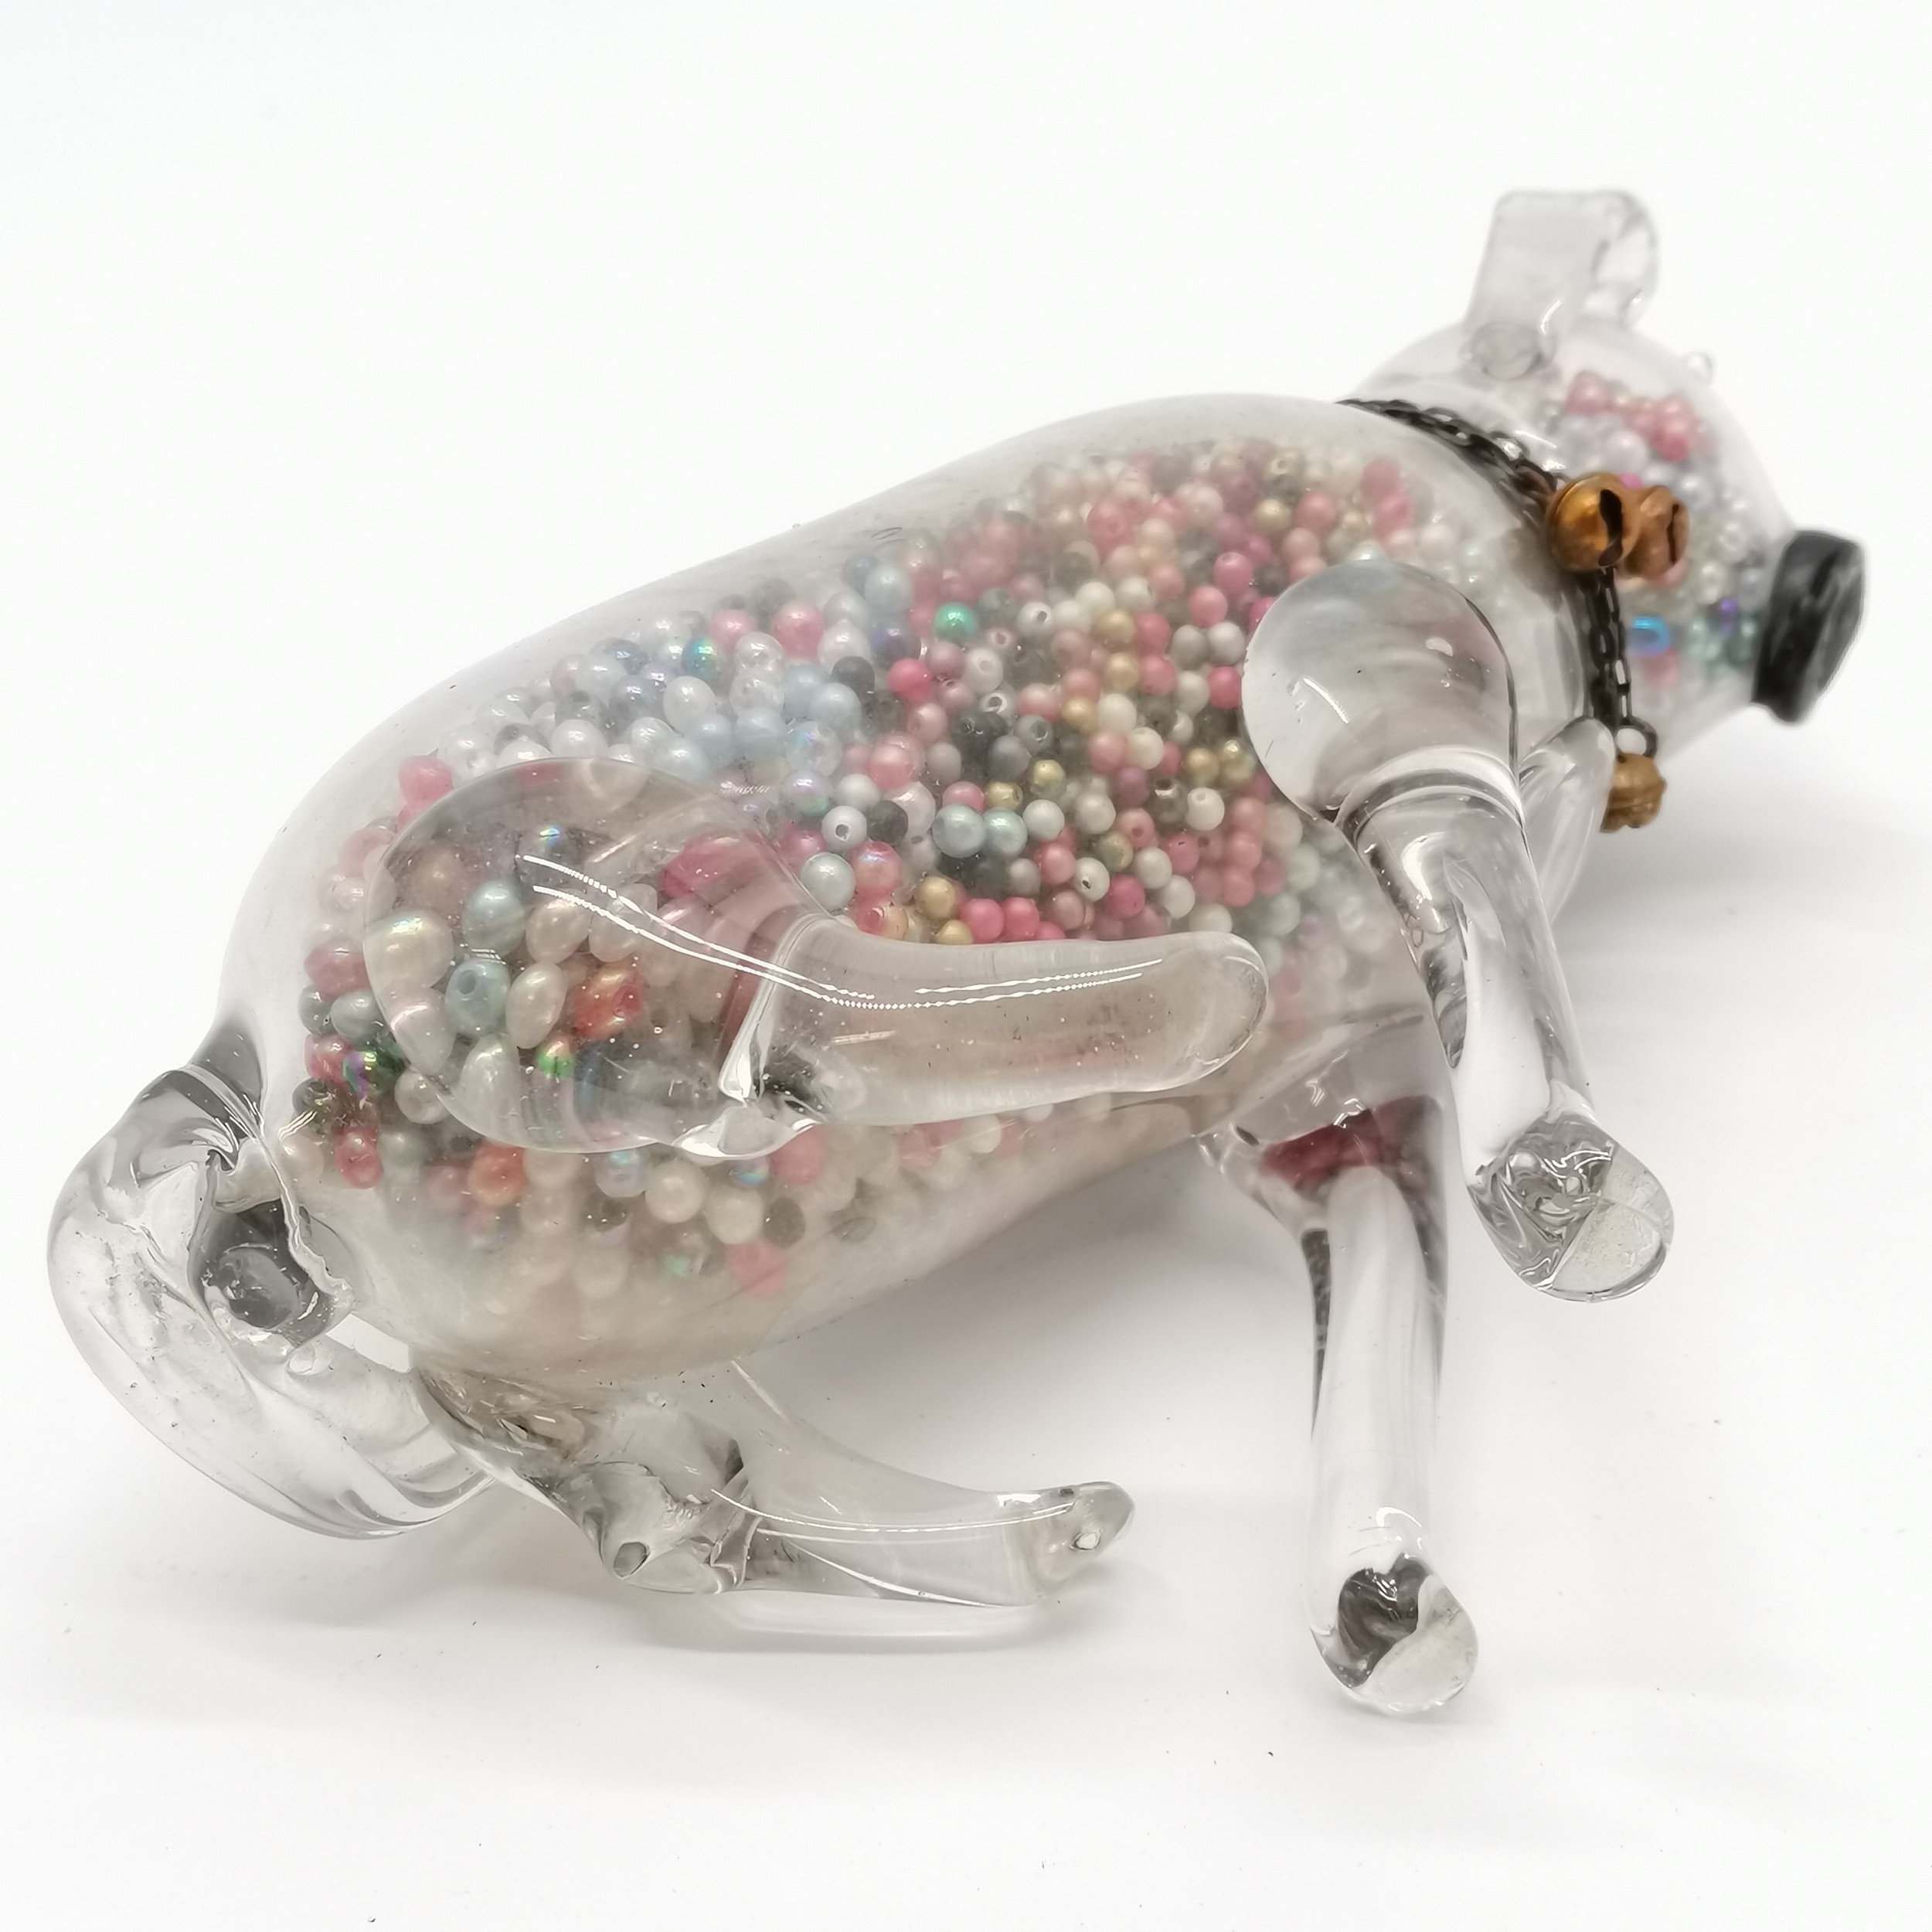 Unusual novelty glass dog figure filled with beads & has a metal chain collar with bells - 18.5cm - Image 4 of 4